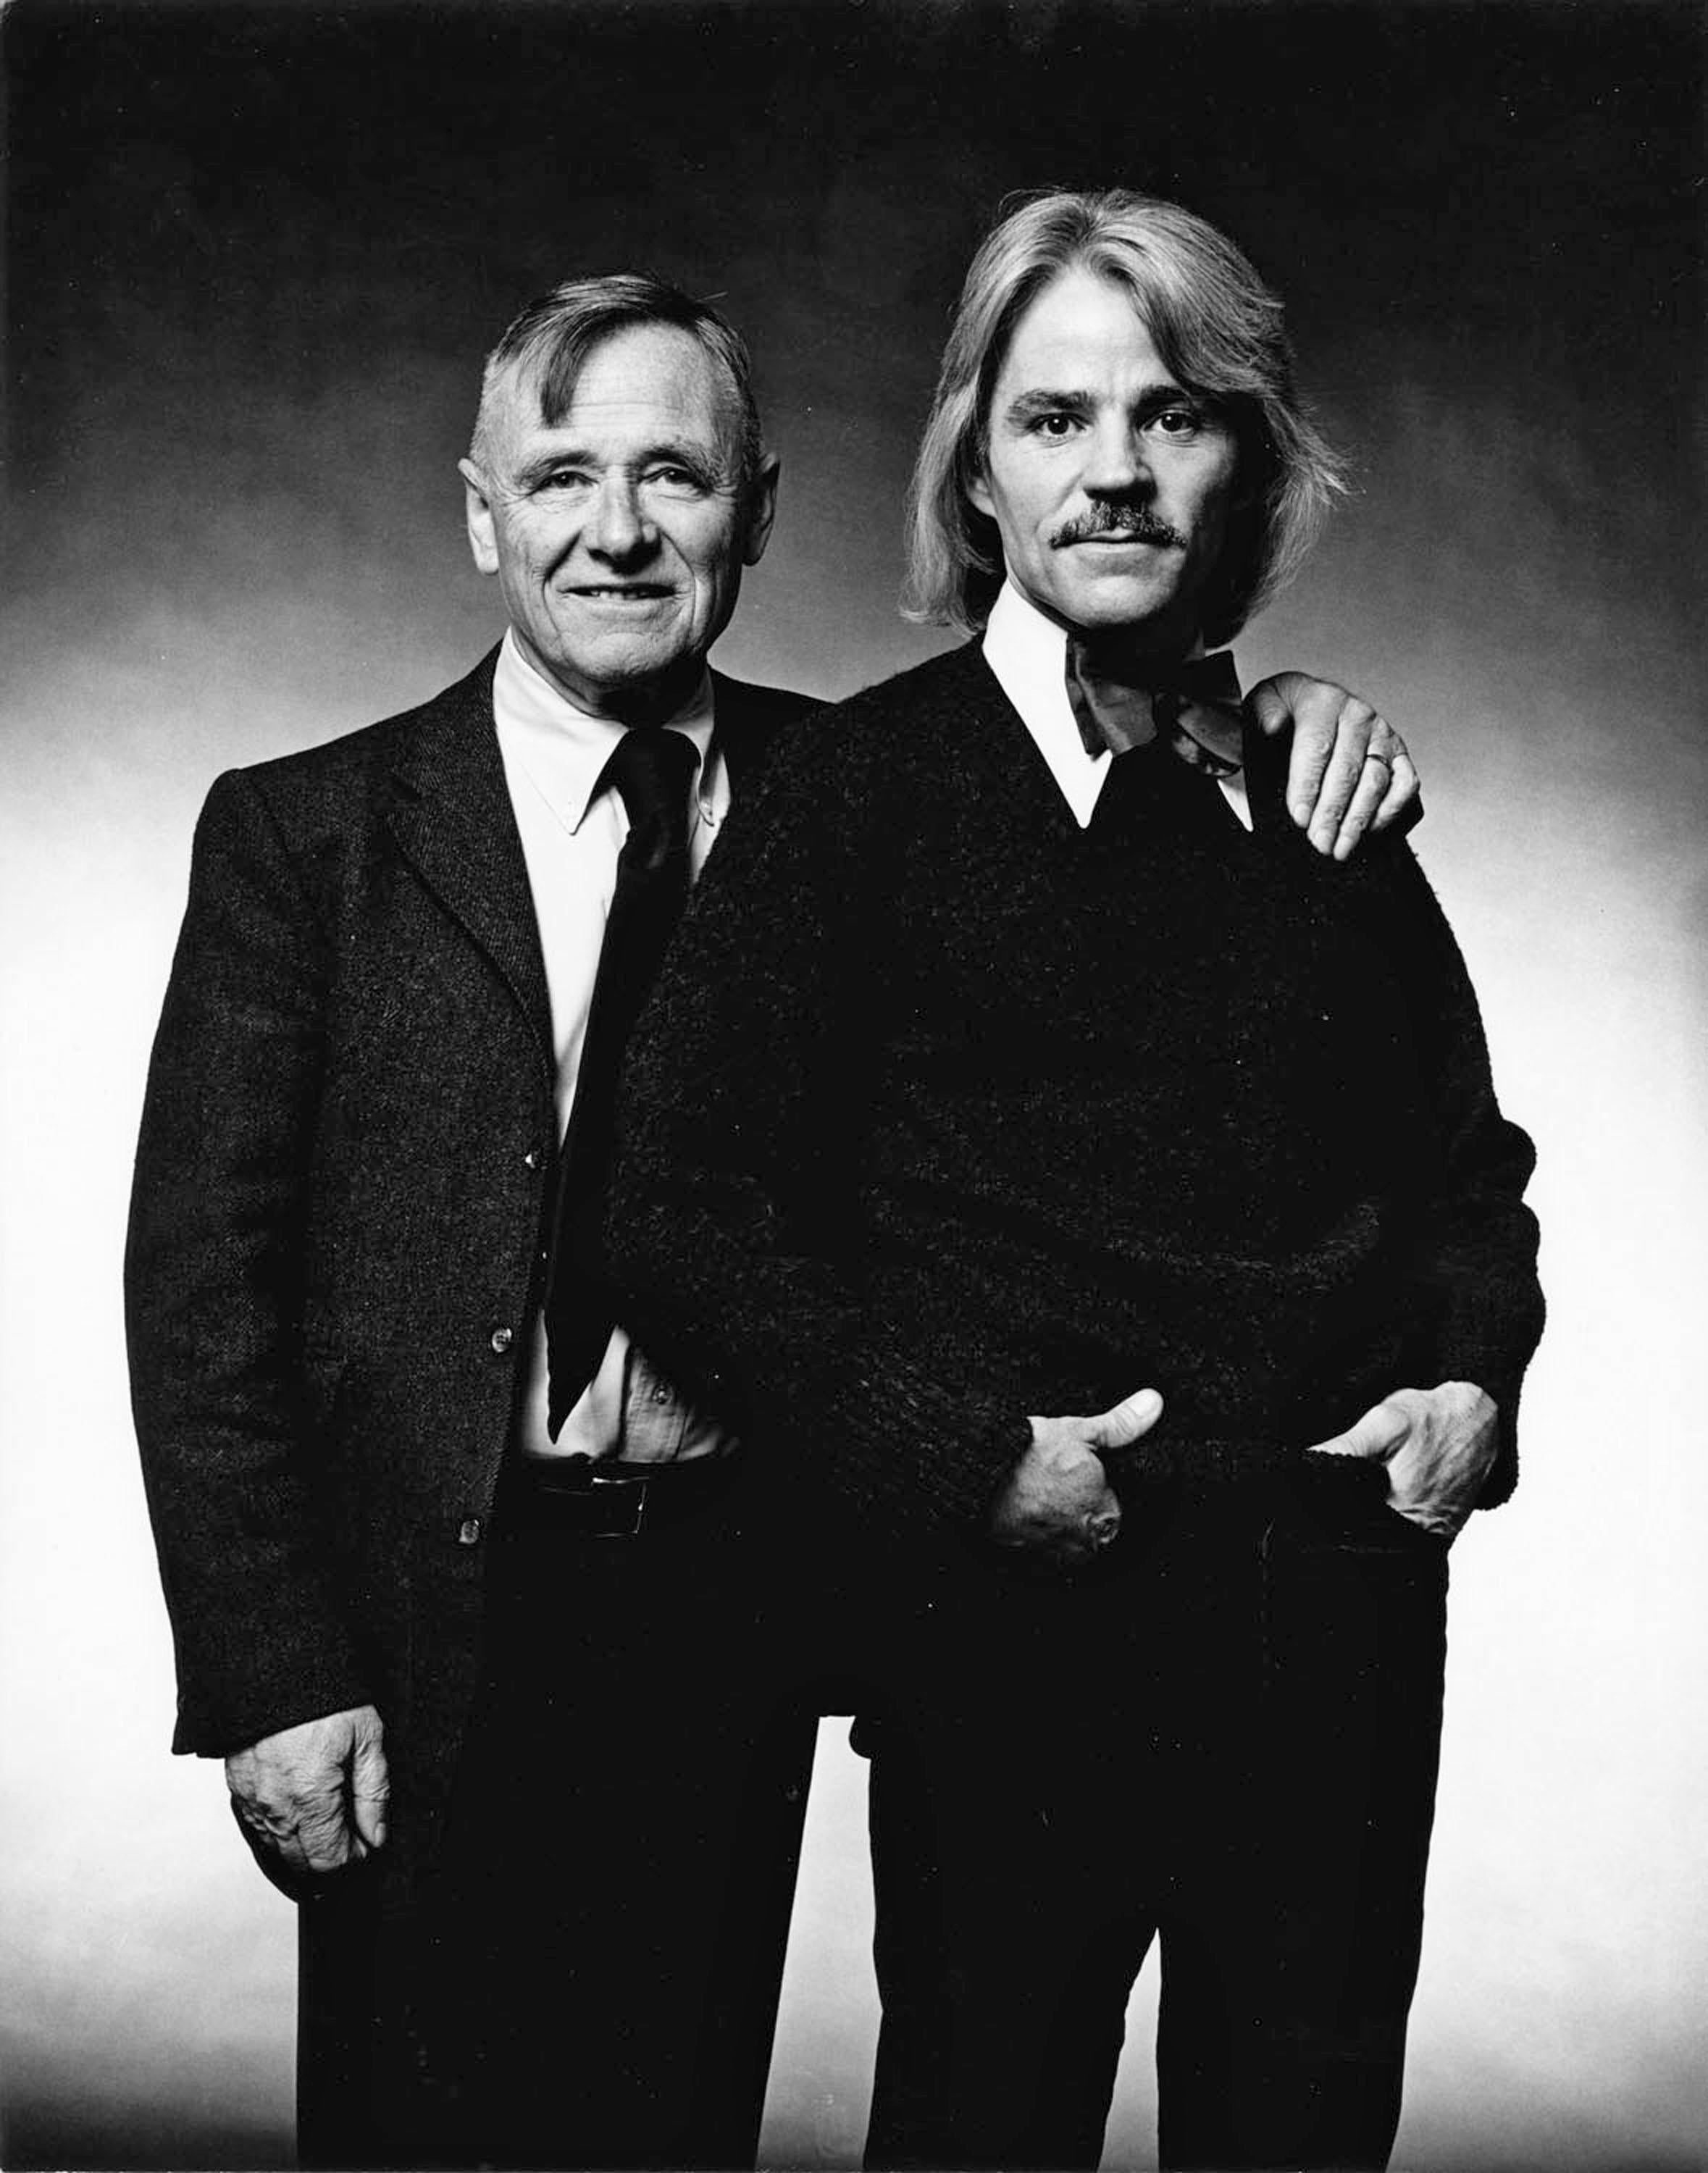 Jack Mitchell Black and White Photograph - Author Christopher Isherwood and his partner artist Don Bachardy